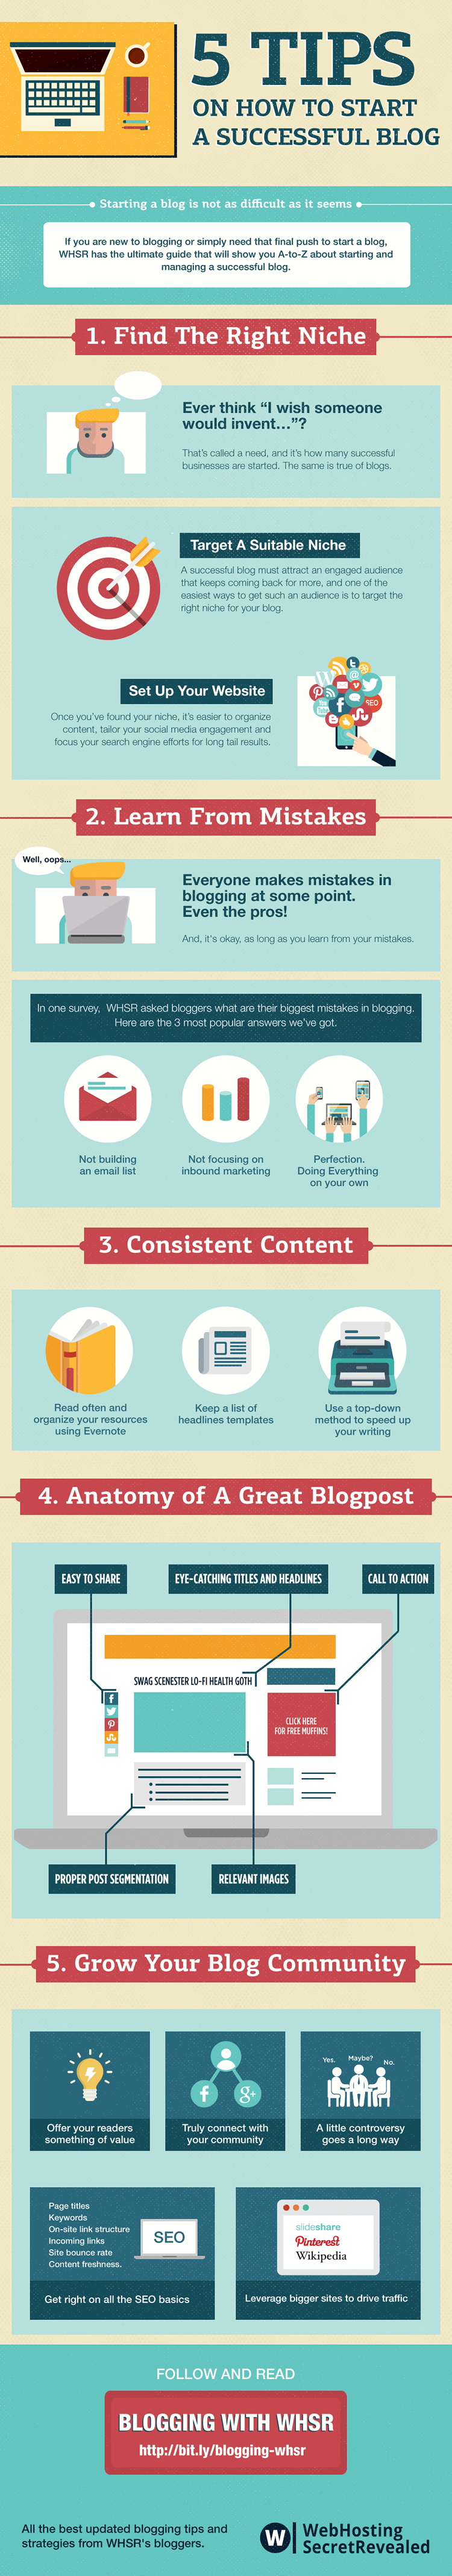 5 Tips On How To Start A Successful Blog